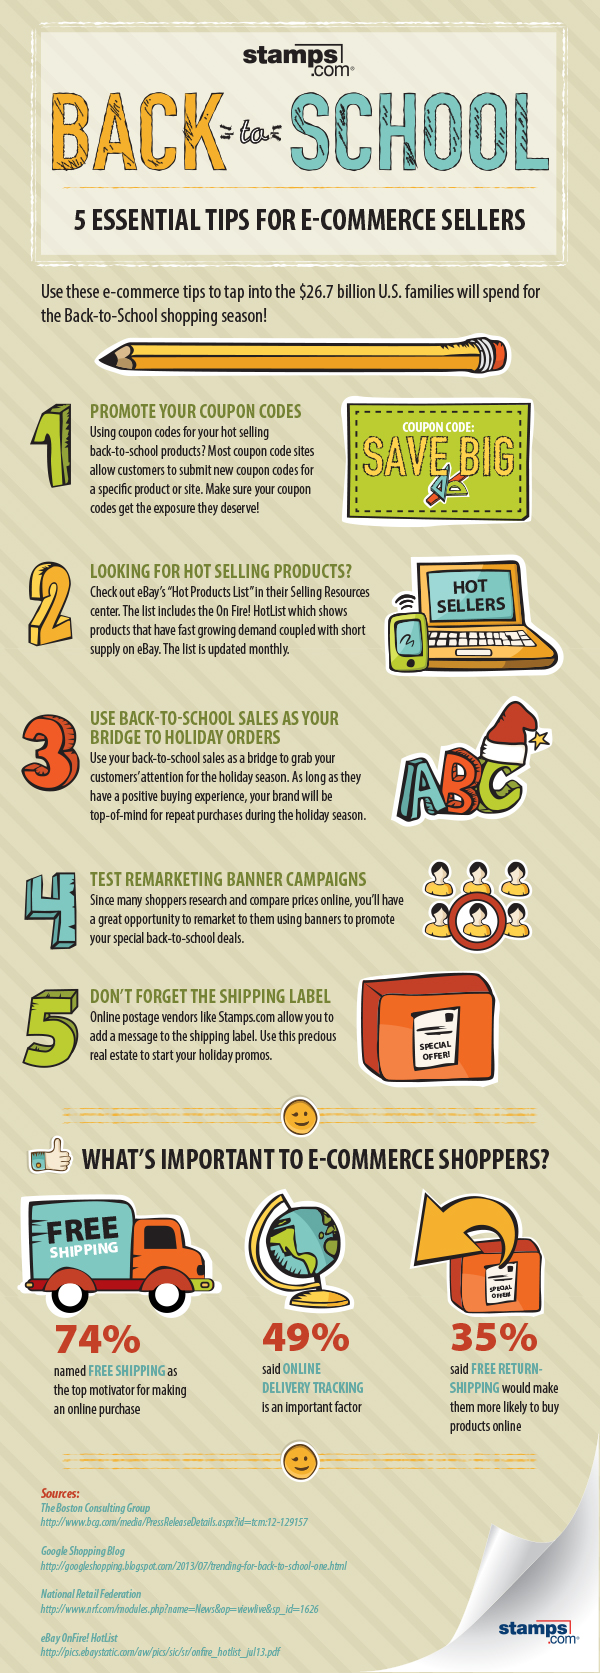 stamps.com_back-to-school_ecommerce-tips_infographic